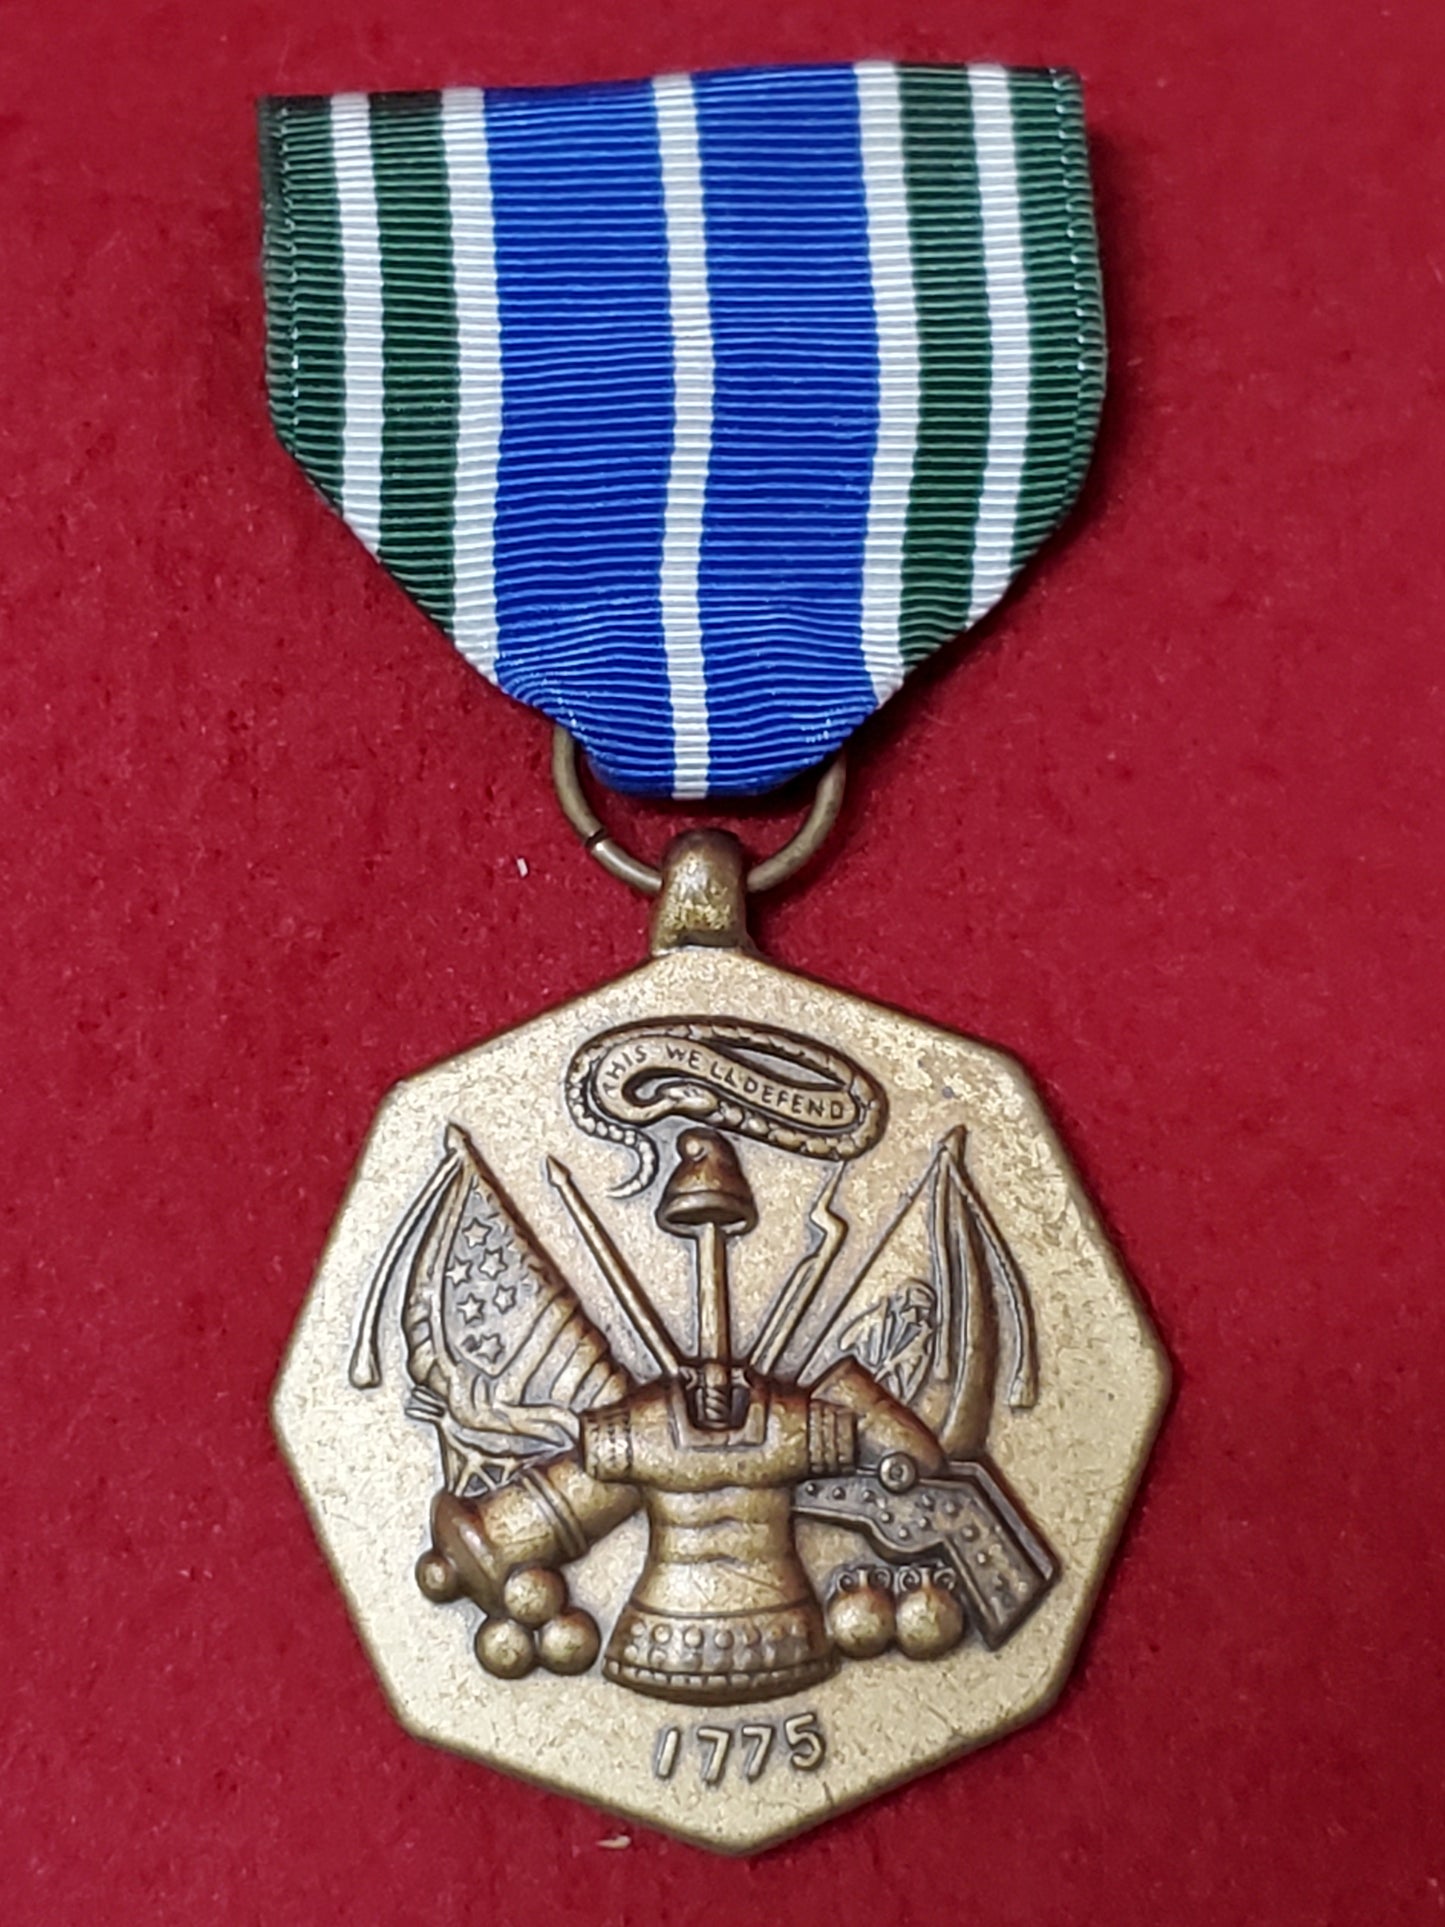 VINTAGE US Army MILITARY ACHIEVEMENT AWARD Full Size Medal (06o109)